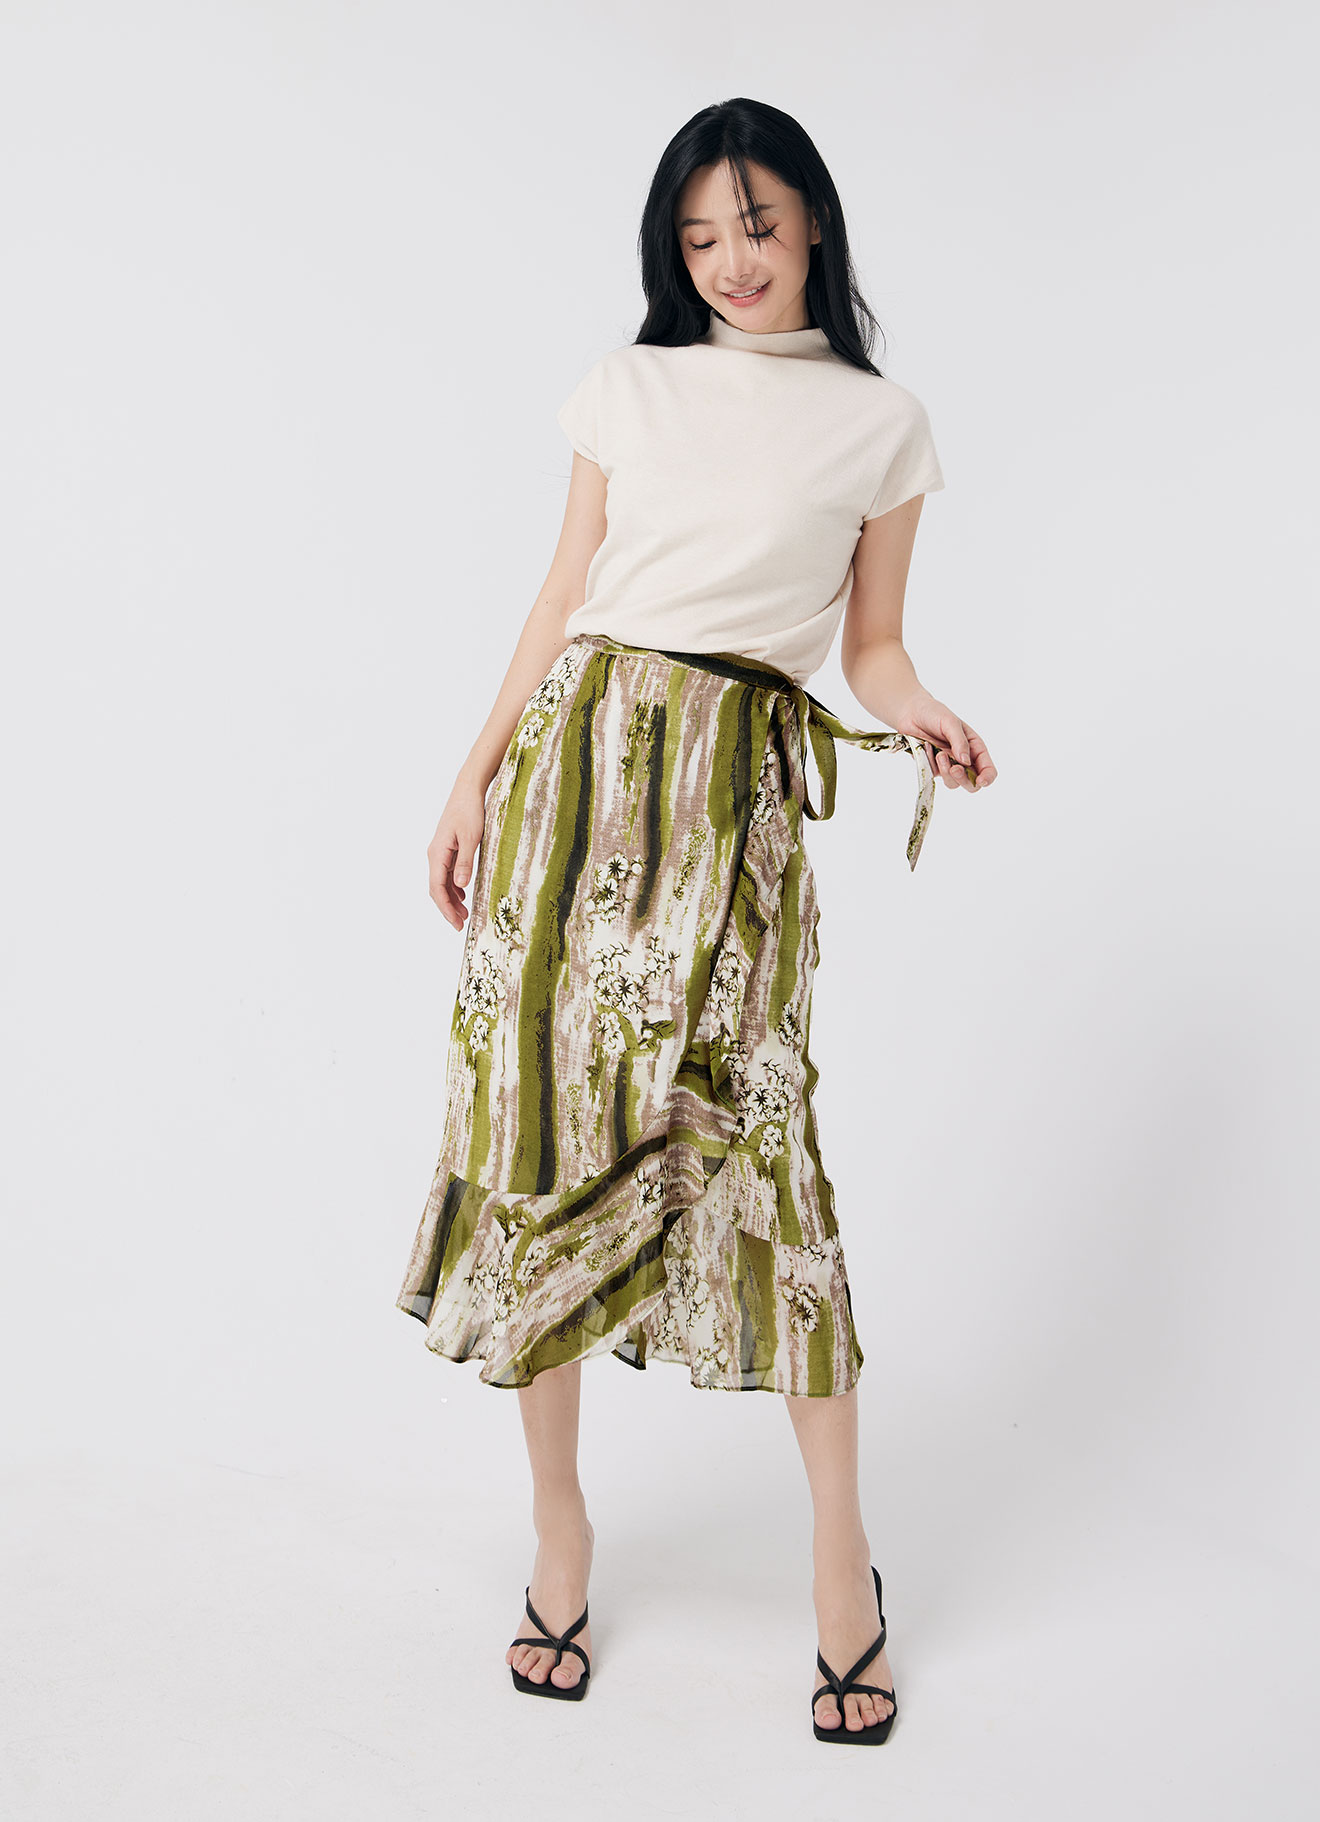 Woodbine by Pleated Skirt